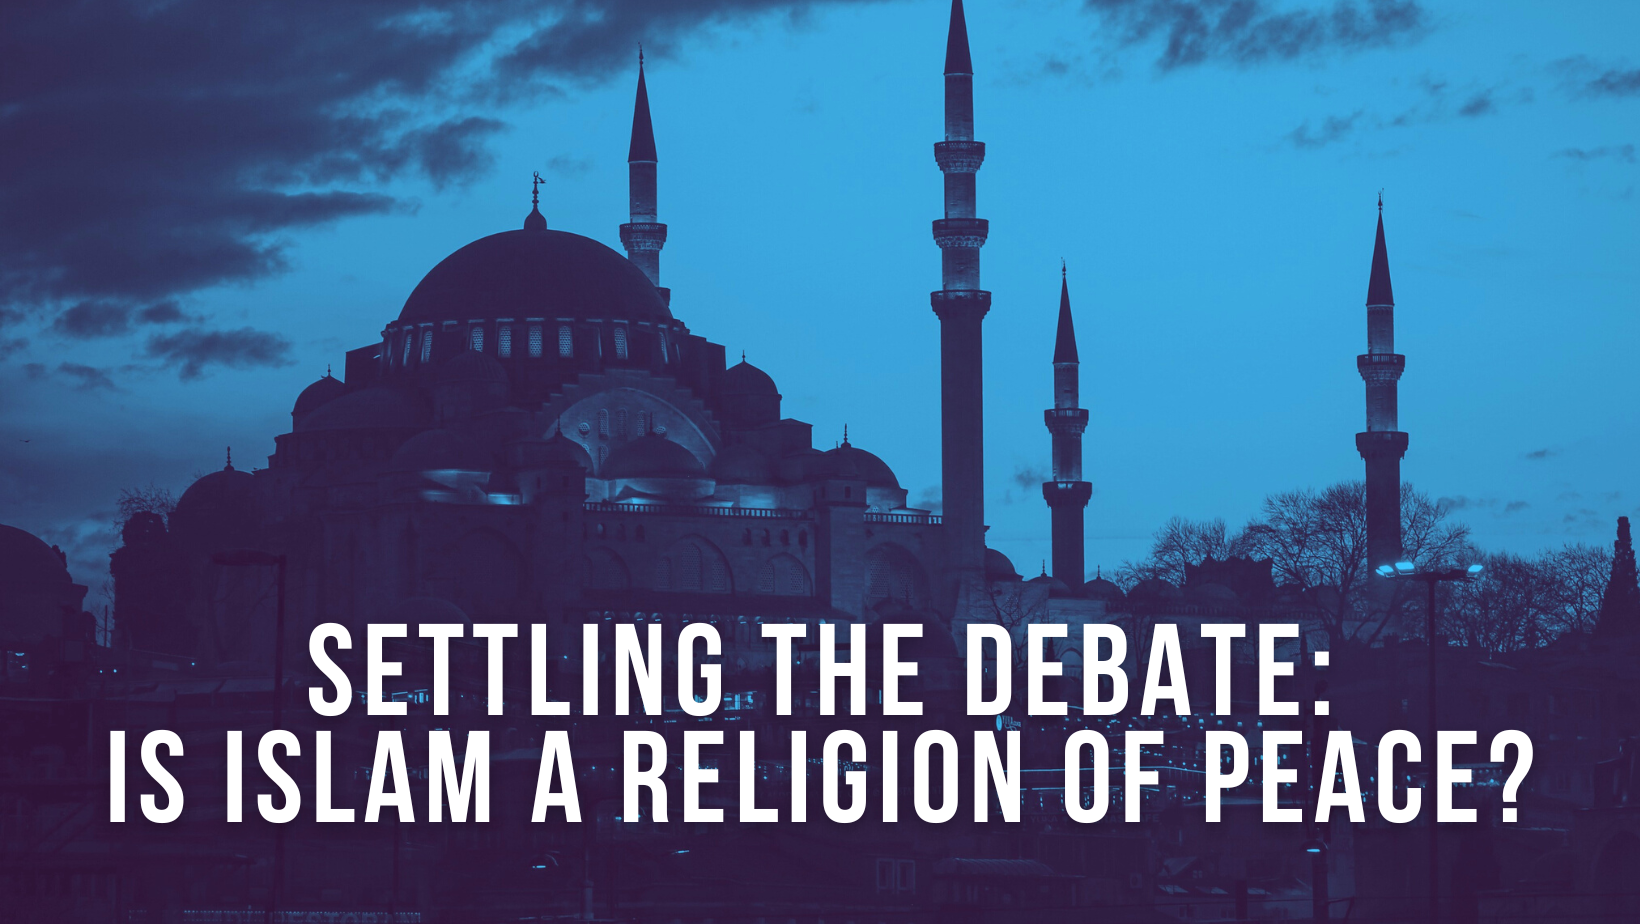 Settling the Debate: Is Islam a religion of peace?